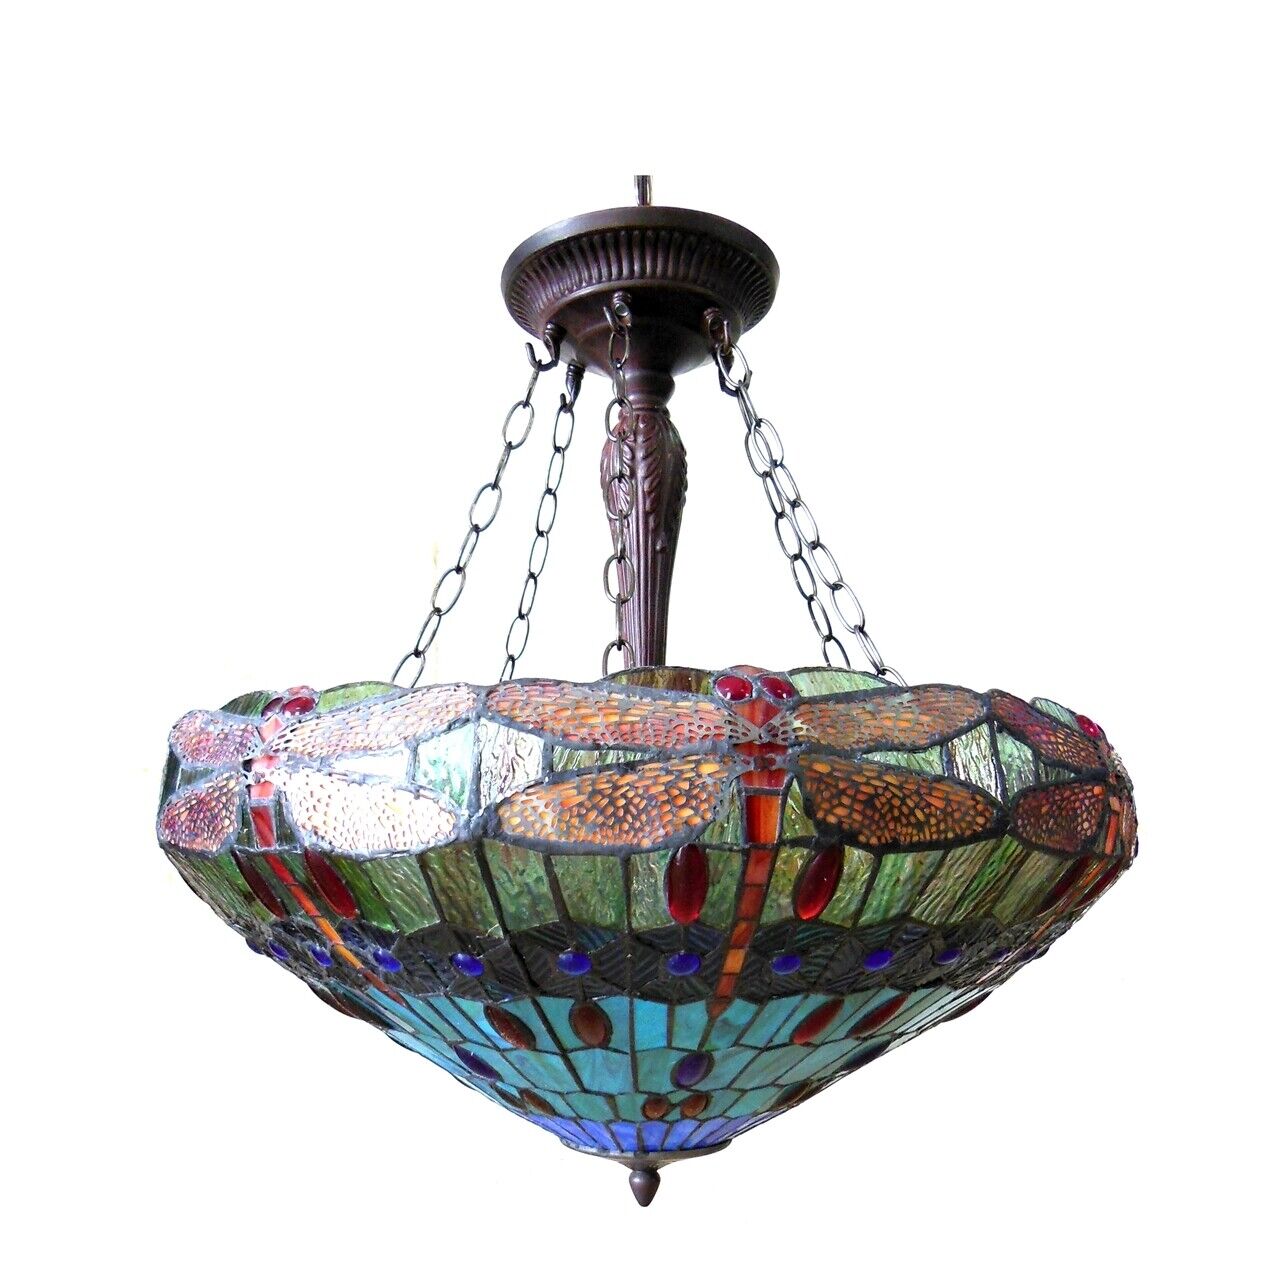 24" Wide Stained Glass Dragonfly Inverted Pendant Ceiling Light